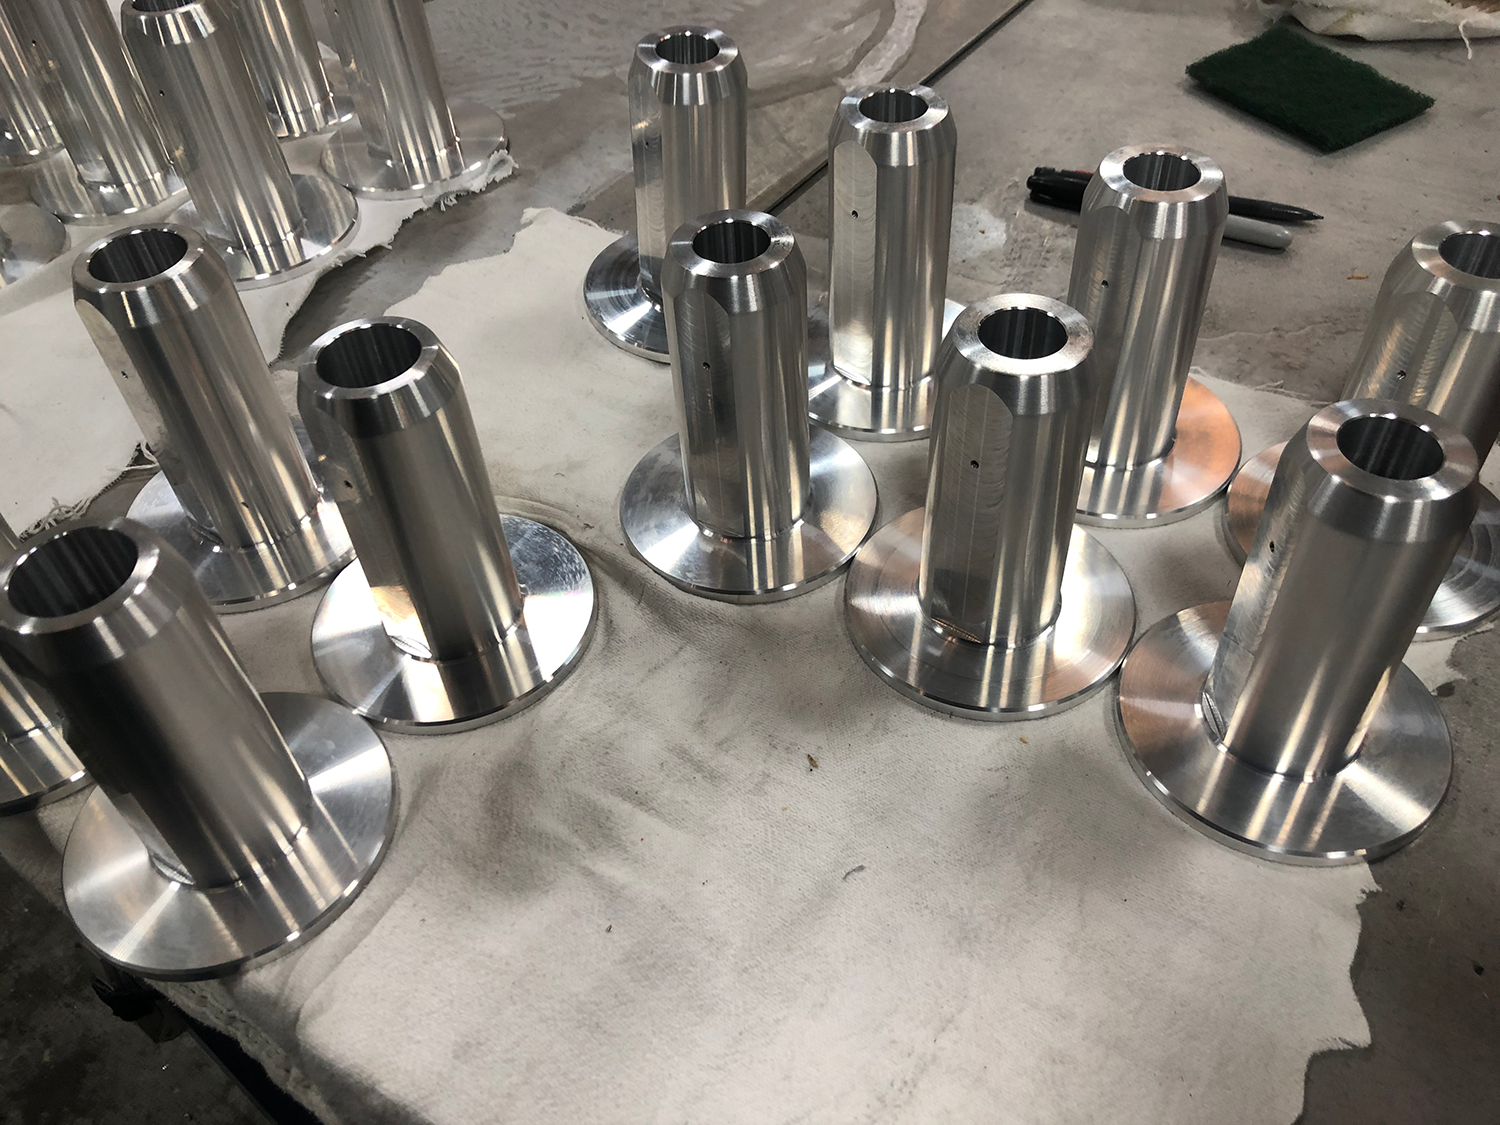 Shaft Covers we make for a local business